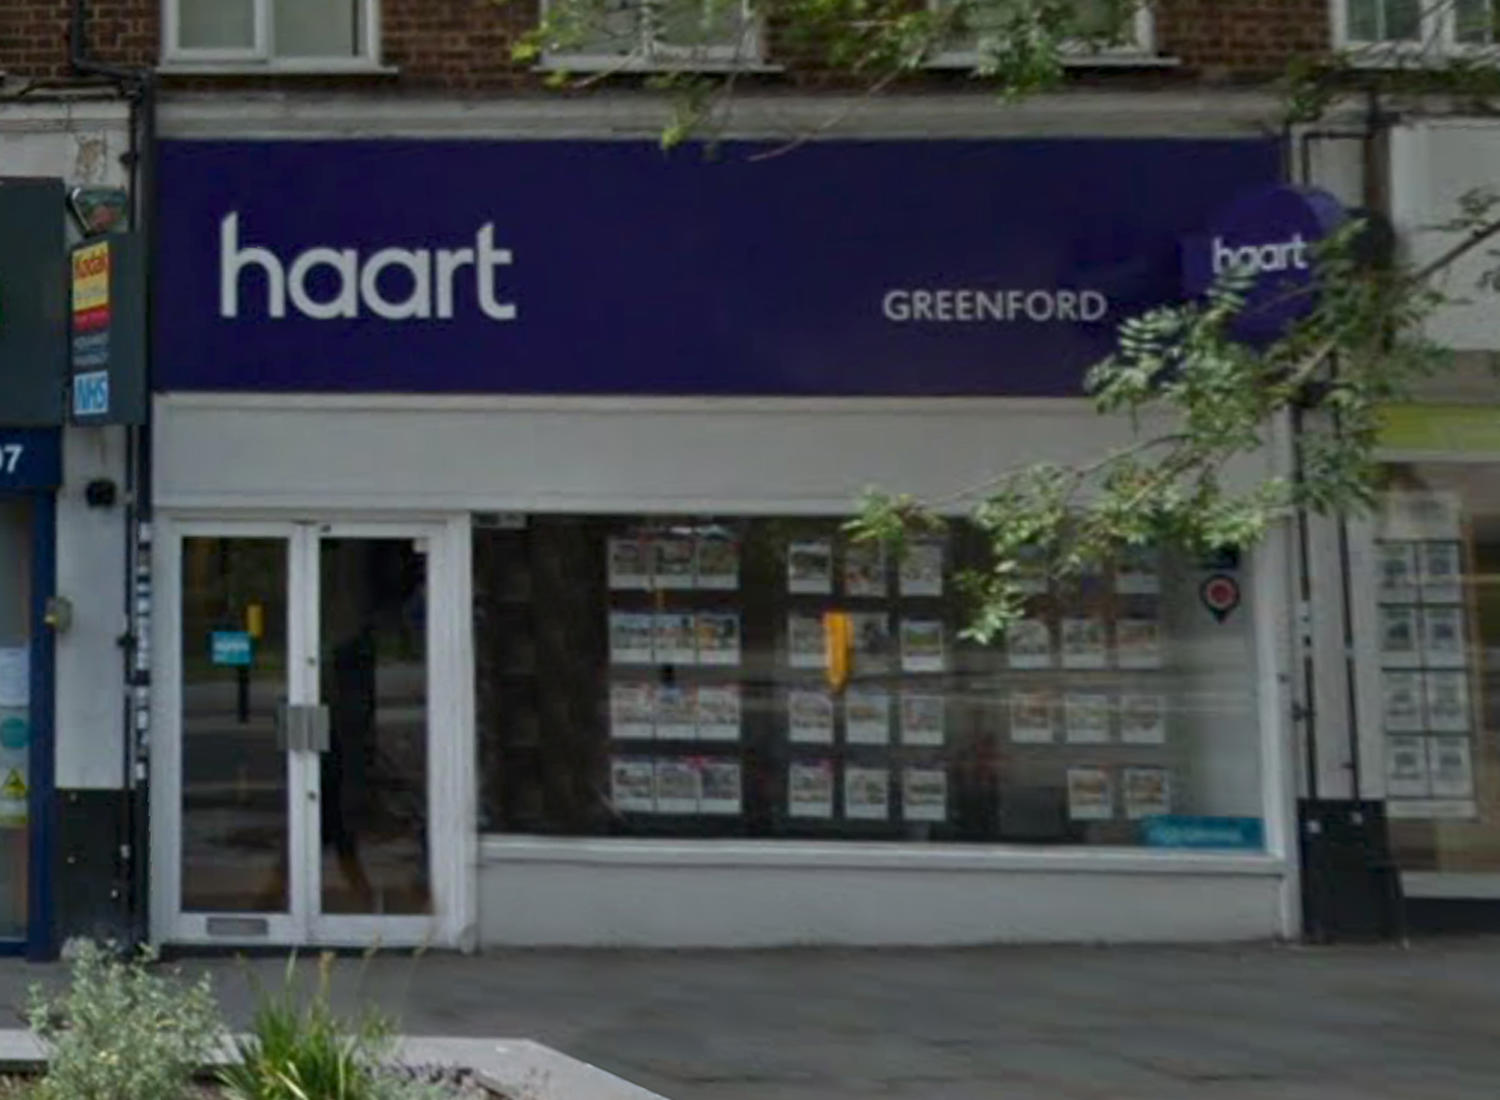 haart estate and lettings agents Greenford Greenford 020 4512 8367